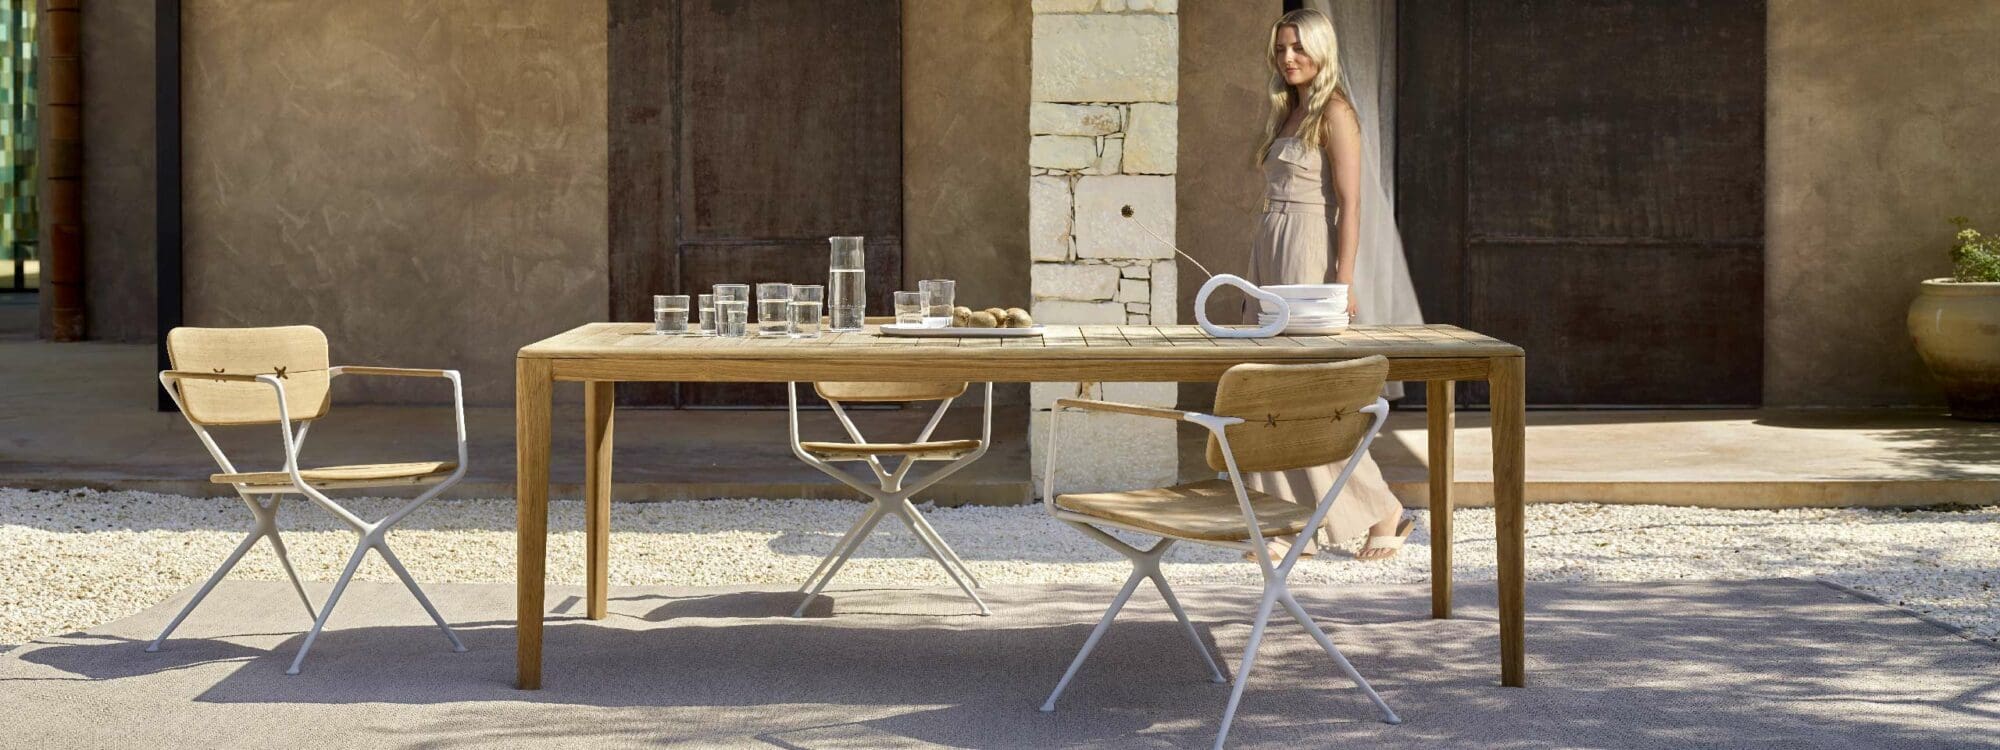 Image of smiling woman walking past Exes garden armchairs and U-NITE teak dining table in a sunny courtyard